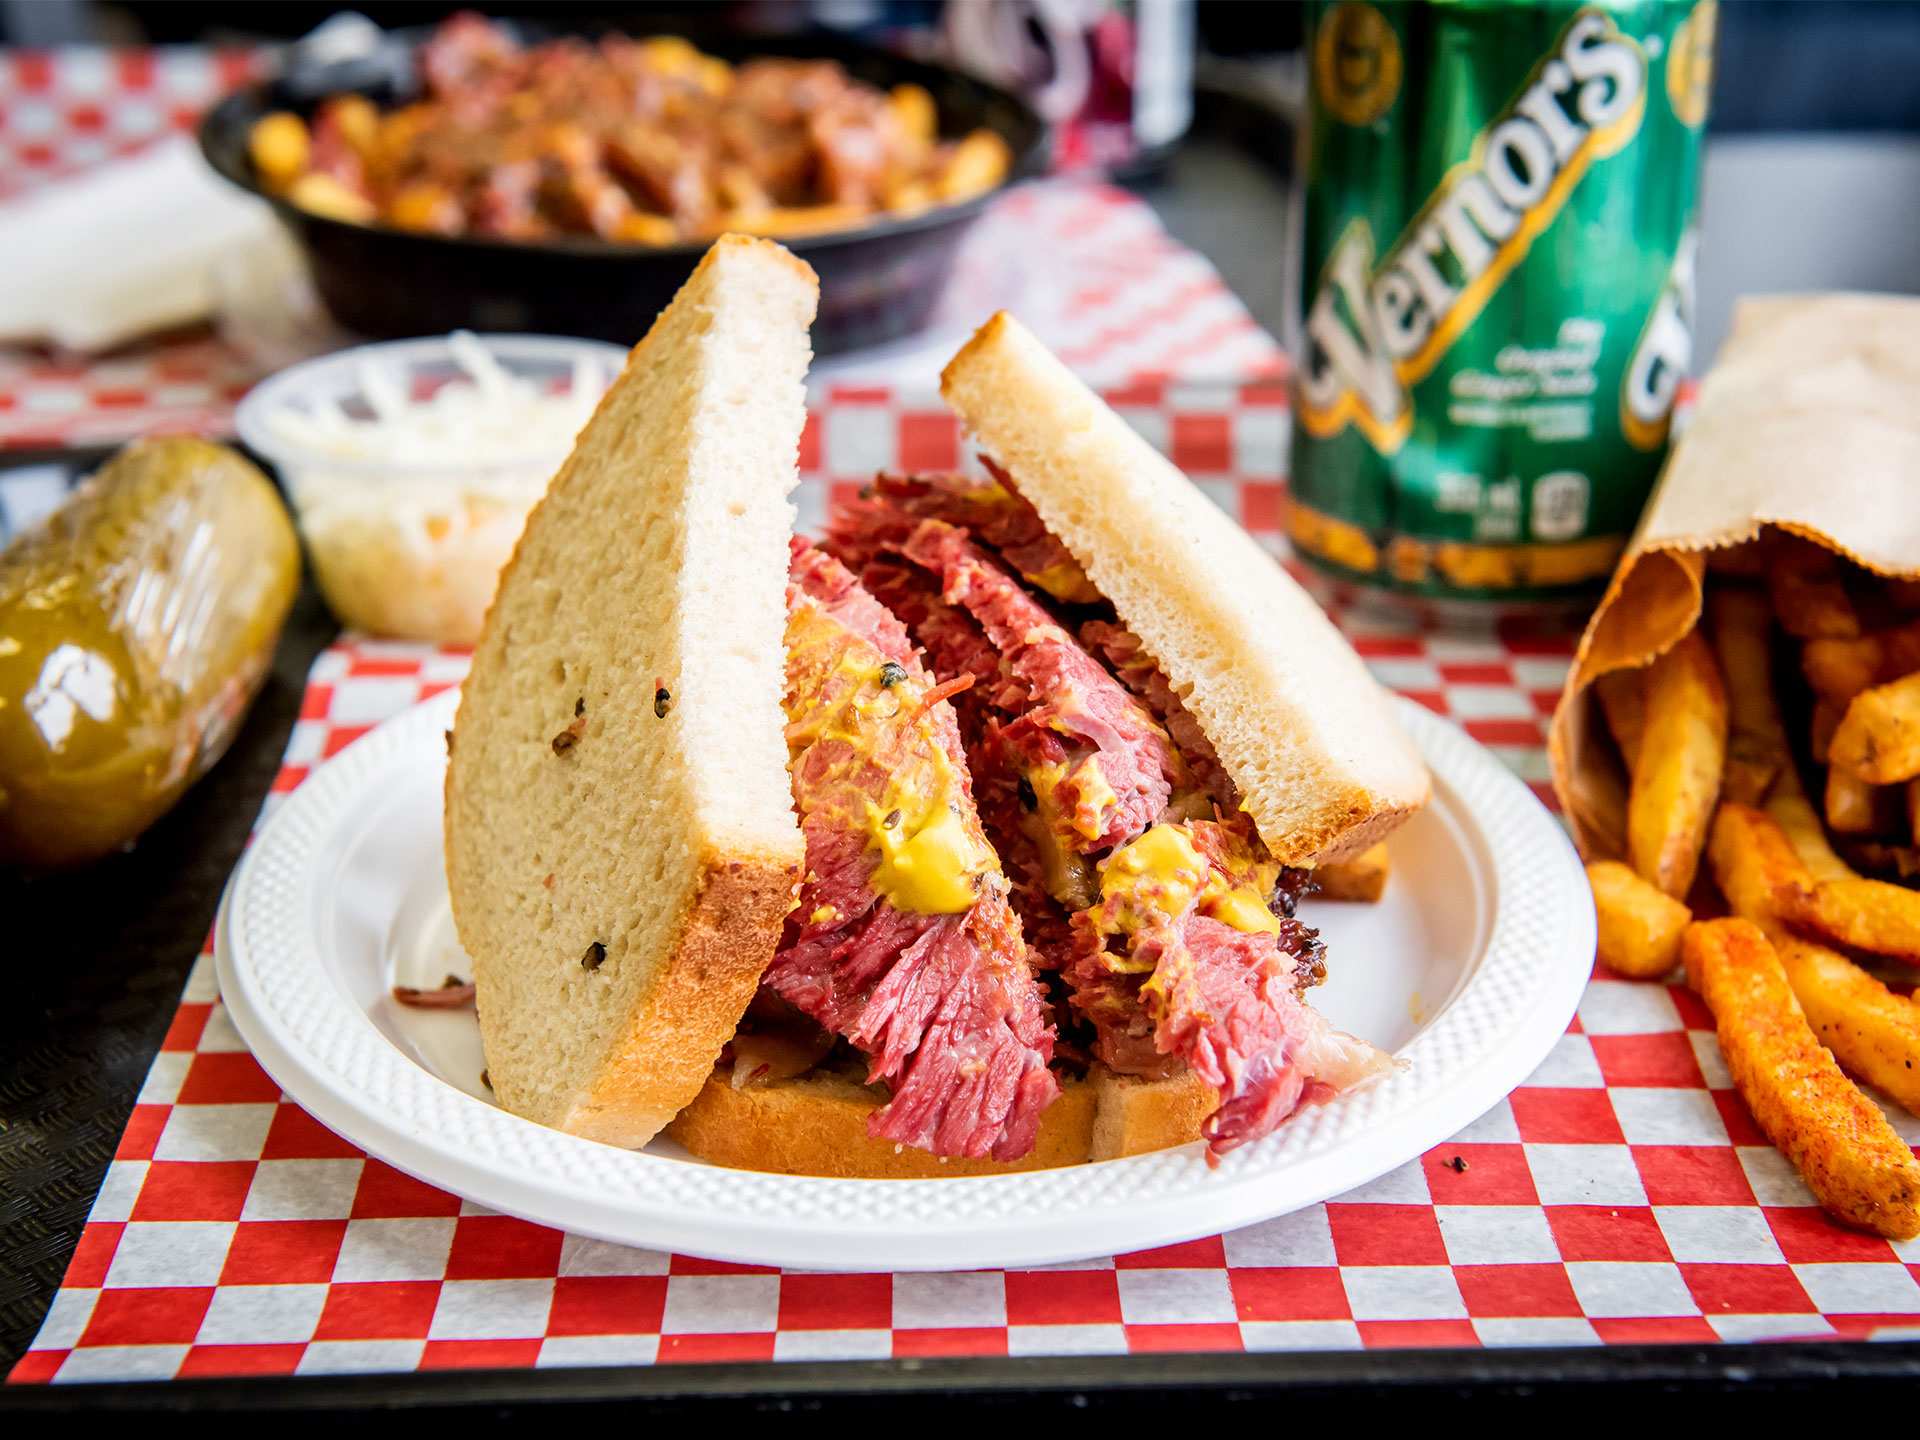 Michelin recommended and Michelin star restaurants in Toronto | SumiLicious Smoked Meat & Deli